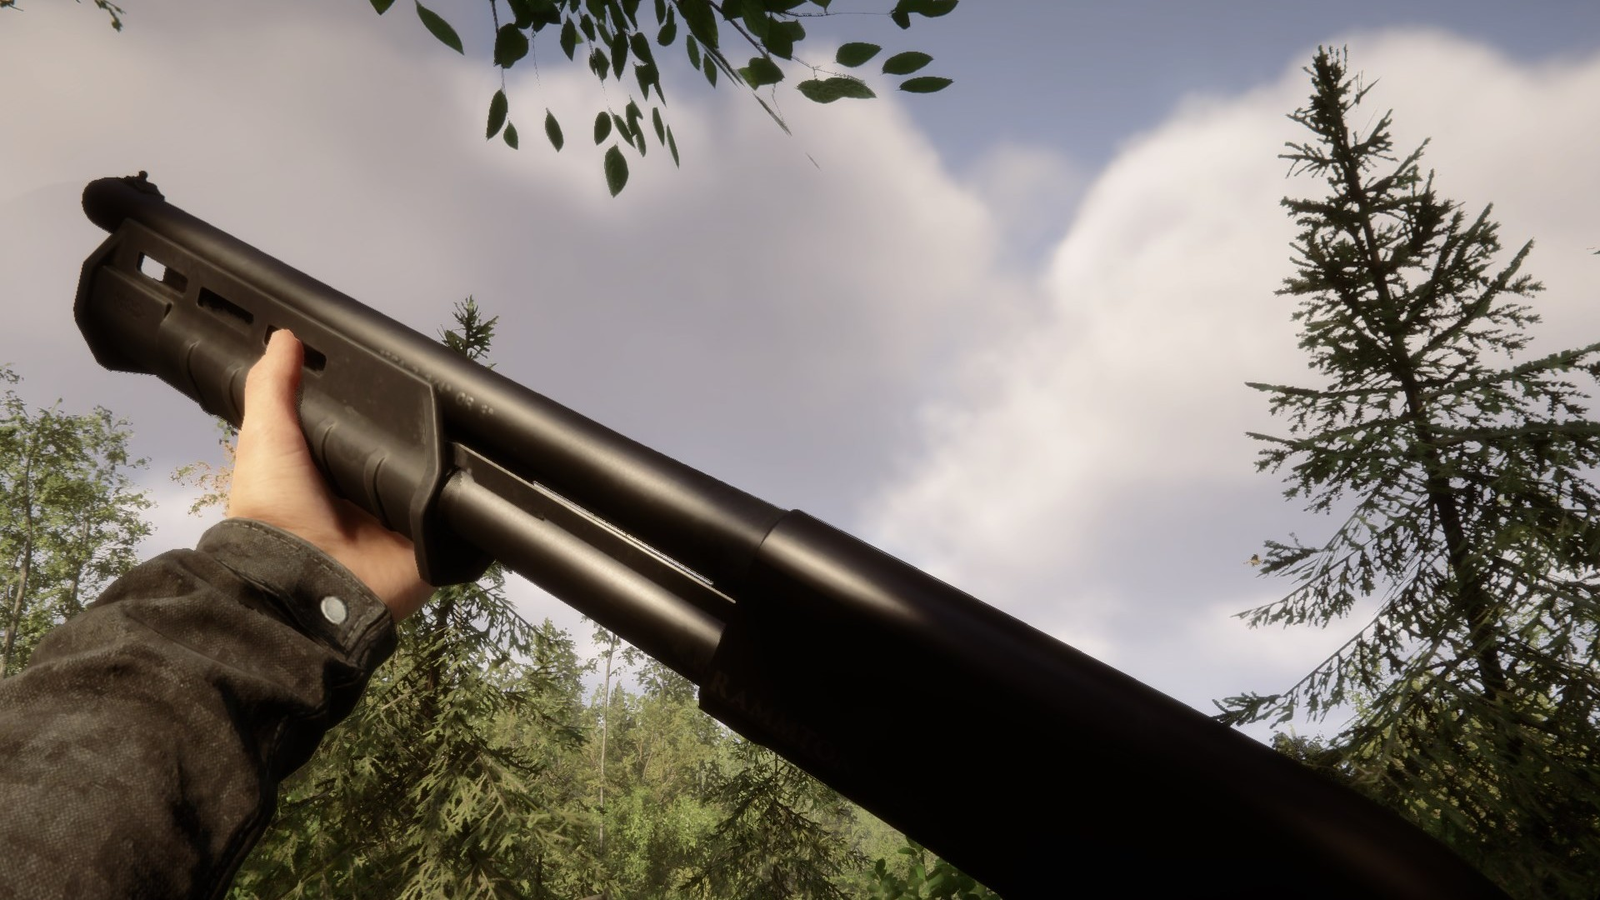 Sons of the Forest: Shotgun location, plus how to get shotgun ammo